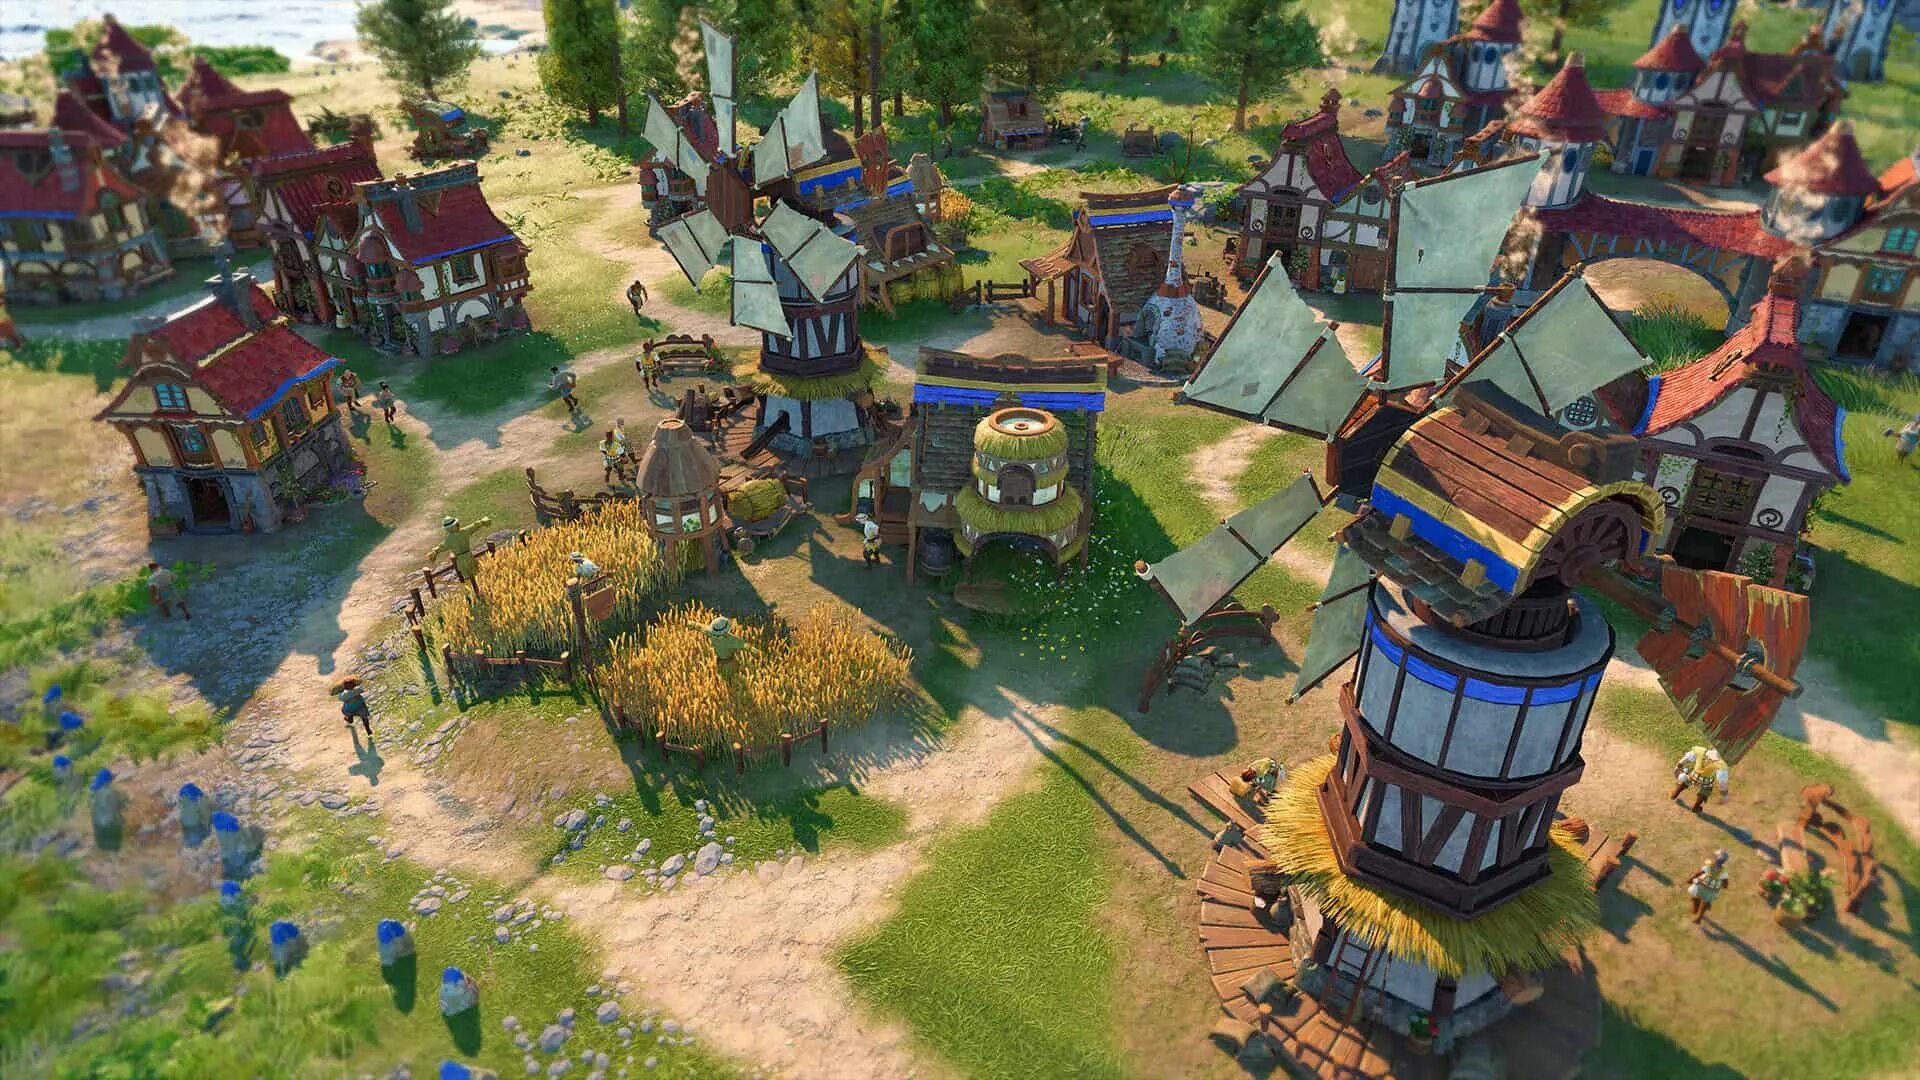 Settlers игра. Сетлерс 2022. The Settlers 2021. The Settlers 9.